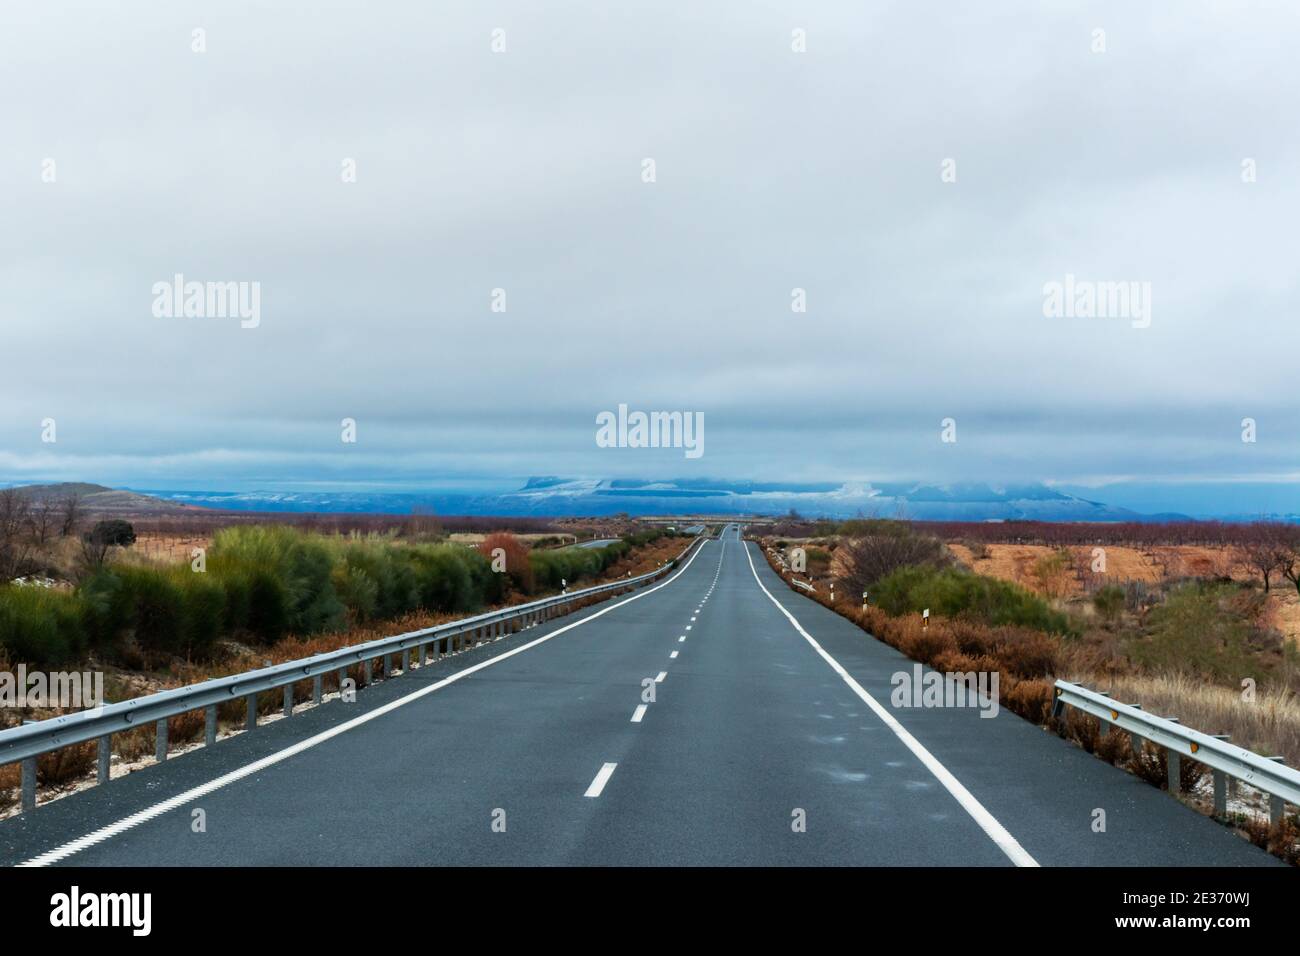 Straight road lost in the horizon on a cloudy day. Stock Photo